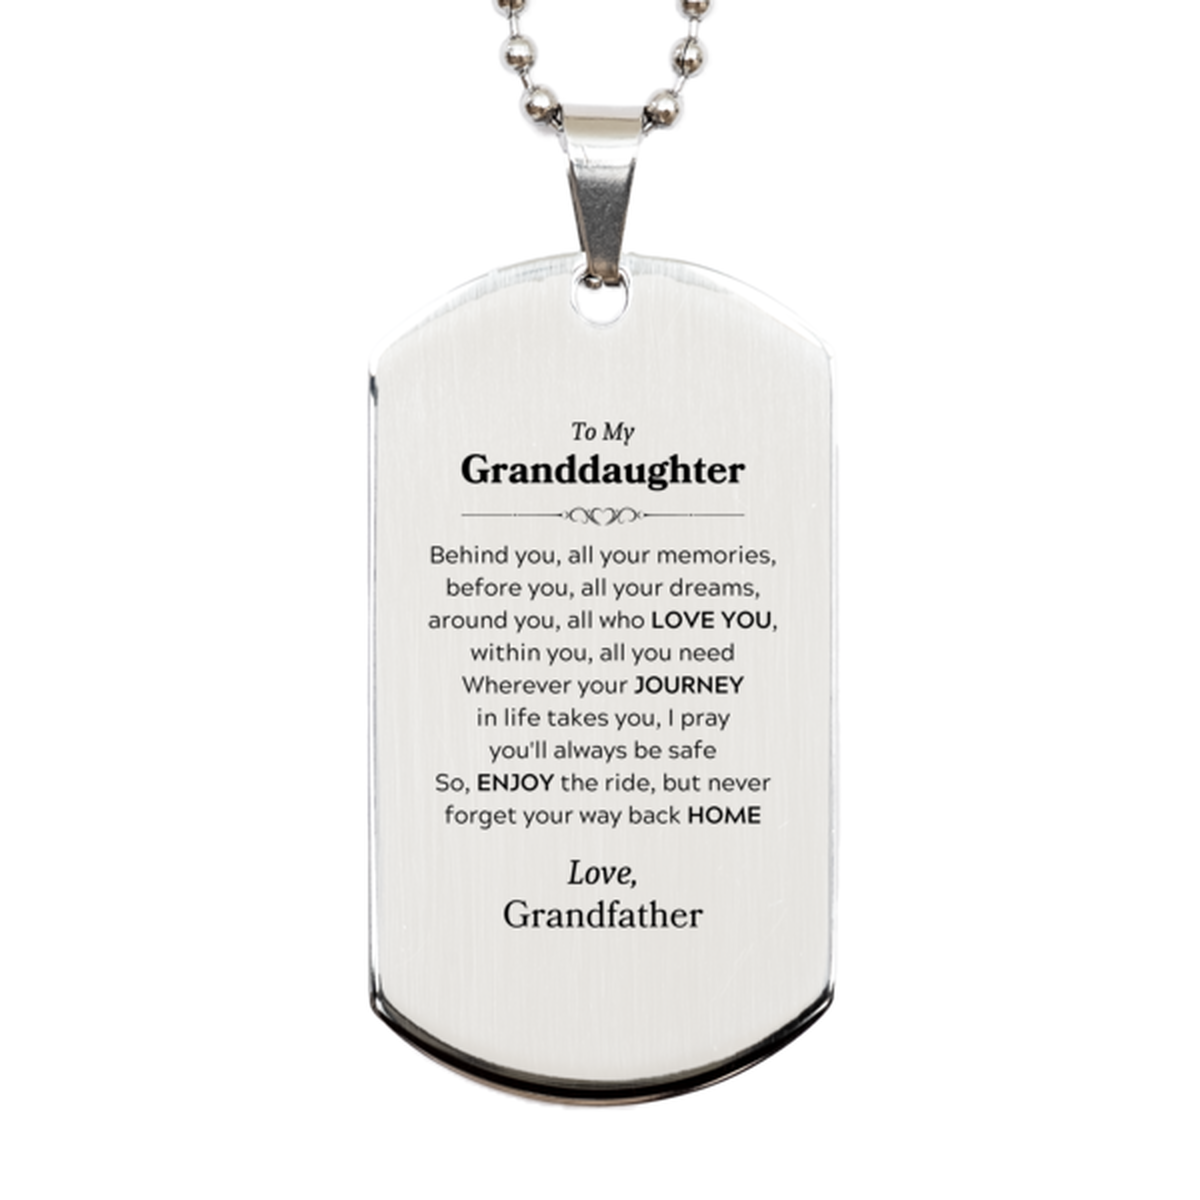 To My Granddaughter Graduation Gifts from Grandfather, Granddaughter Silver Dog Tag Christmas Birthday Gifts for Granddaughter Behind you, all your memories, before you, all your dreams. Love, Grandfather